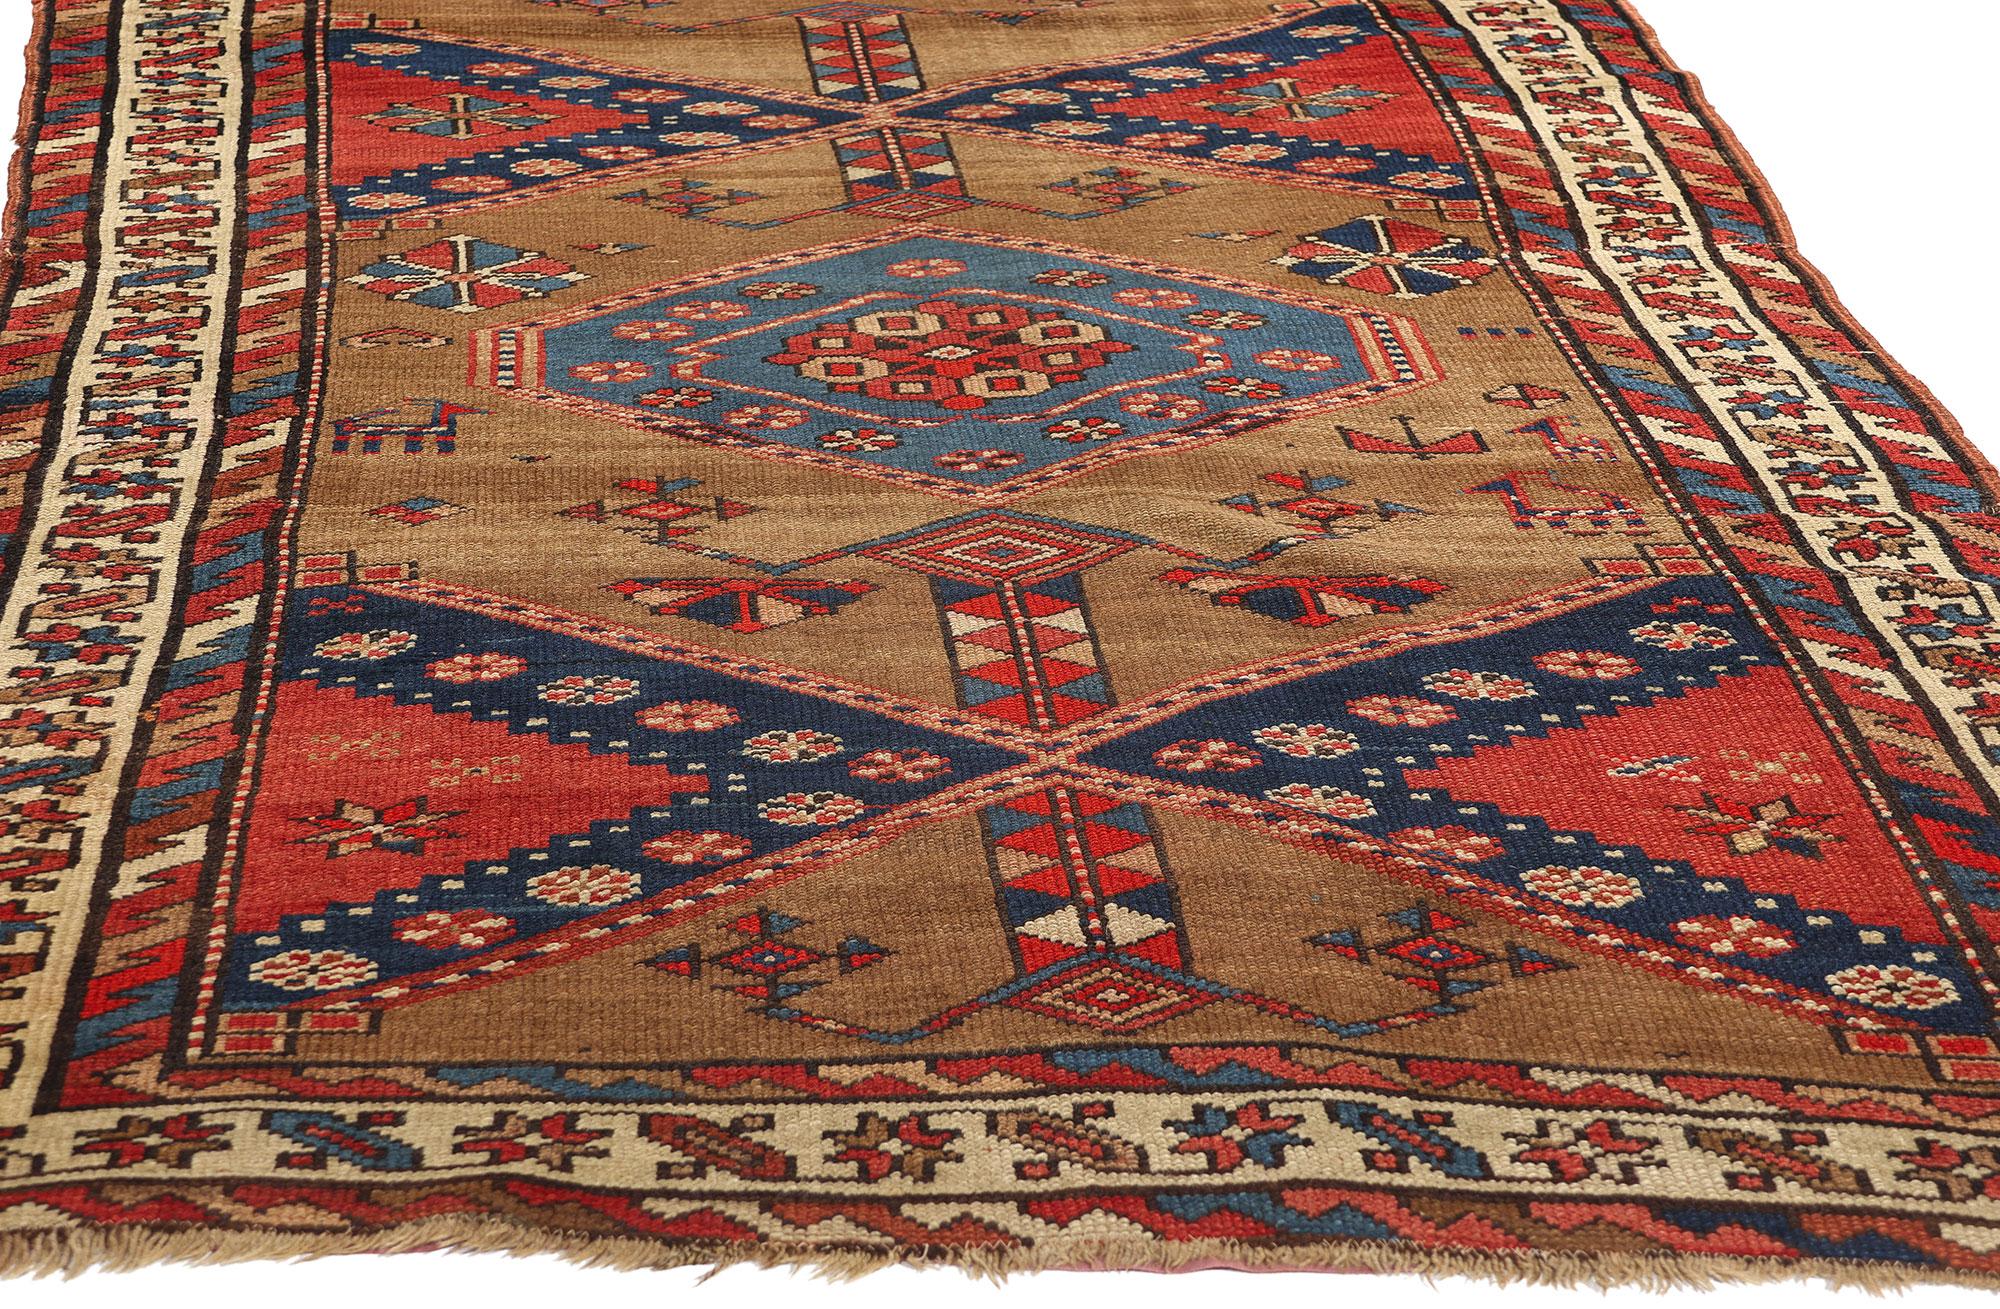 73991 Antique Persian Sarab Rug Runner, 04’04 x 11’00. Persian Sarab rugs and carpet runners, originating from the northwest region of Iran, are celebrated for their exquisite craftsmanship, intricate designs, and fine materials. Typically woven